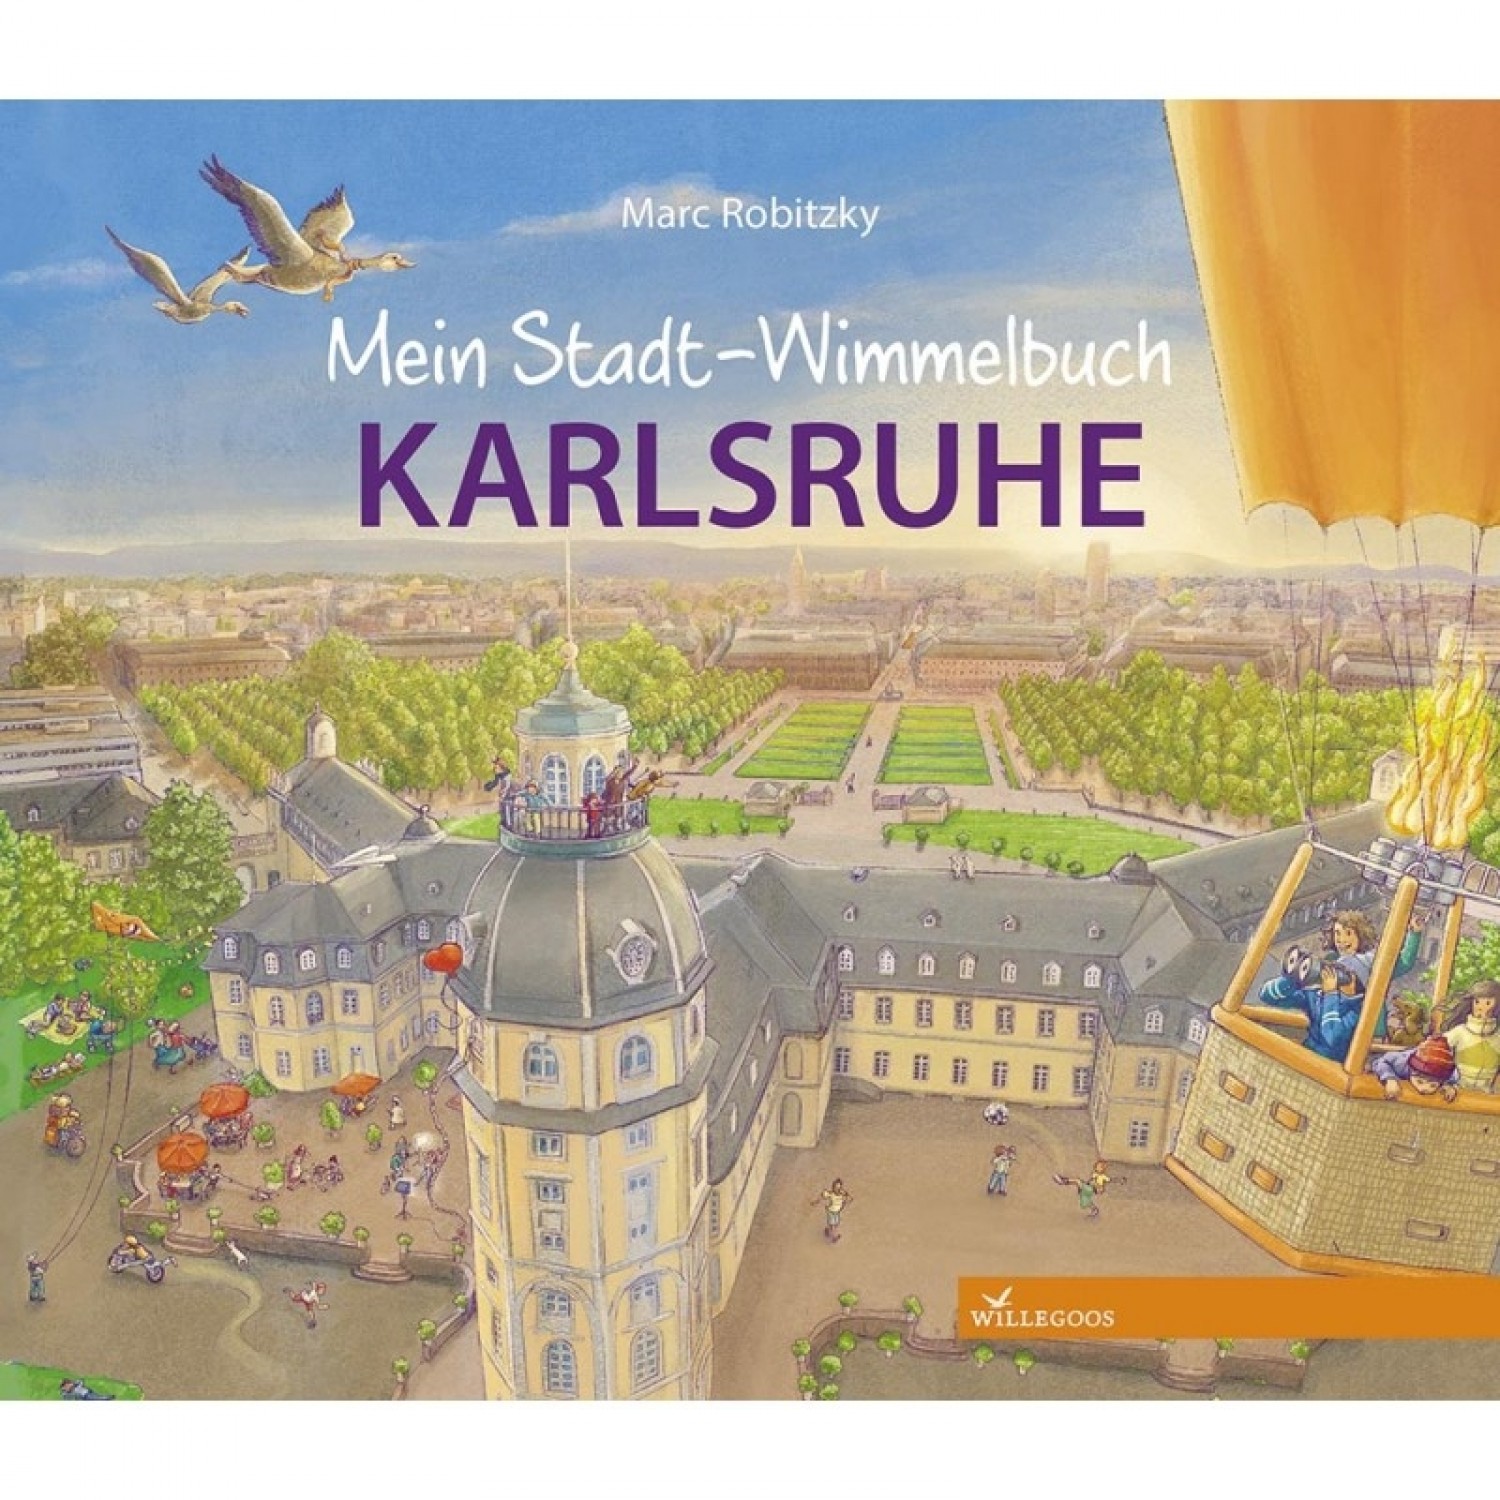 Discover the German Town Karlsruhe - picture book | Willegoos